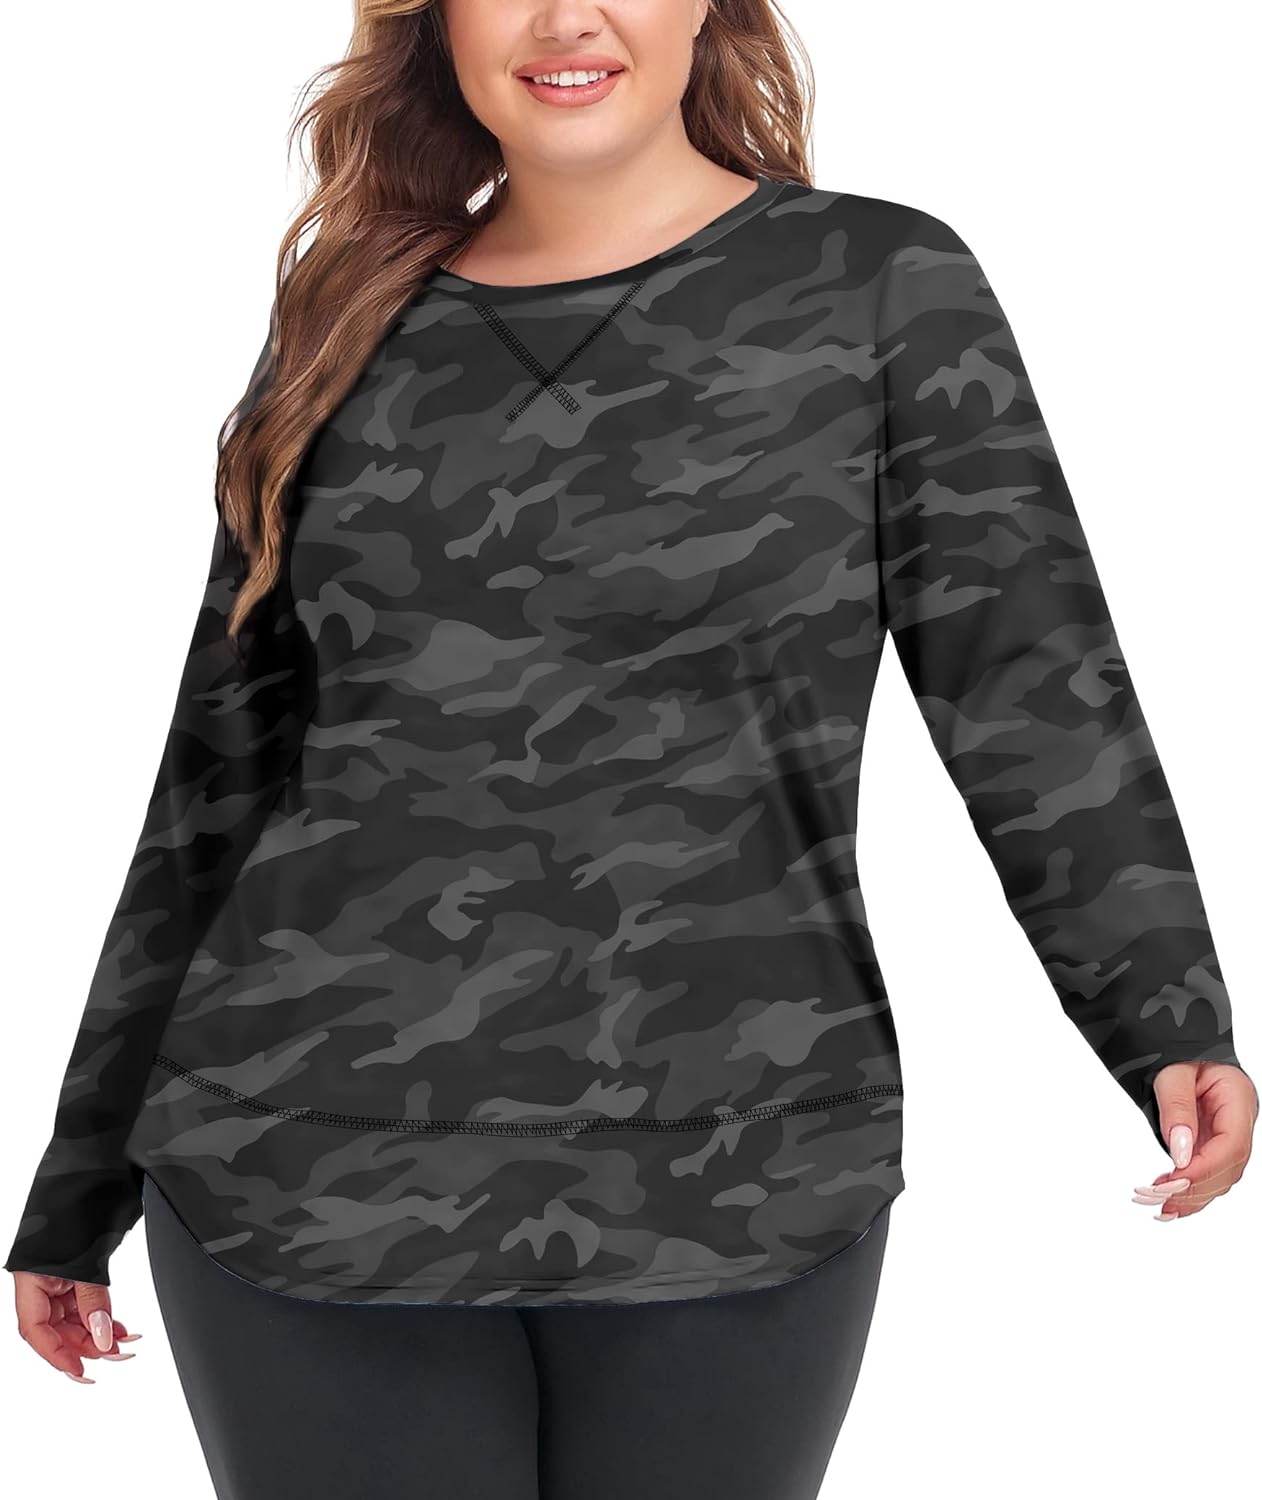 COOTRY Plus Size Workout Tops for Women Long Sleeve Shirts Breathable Dry  Fit At